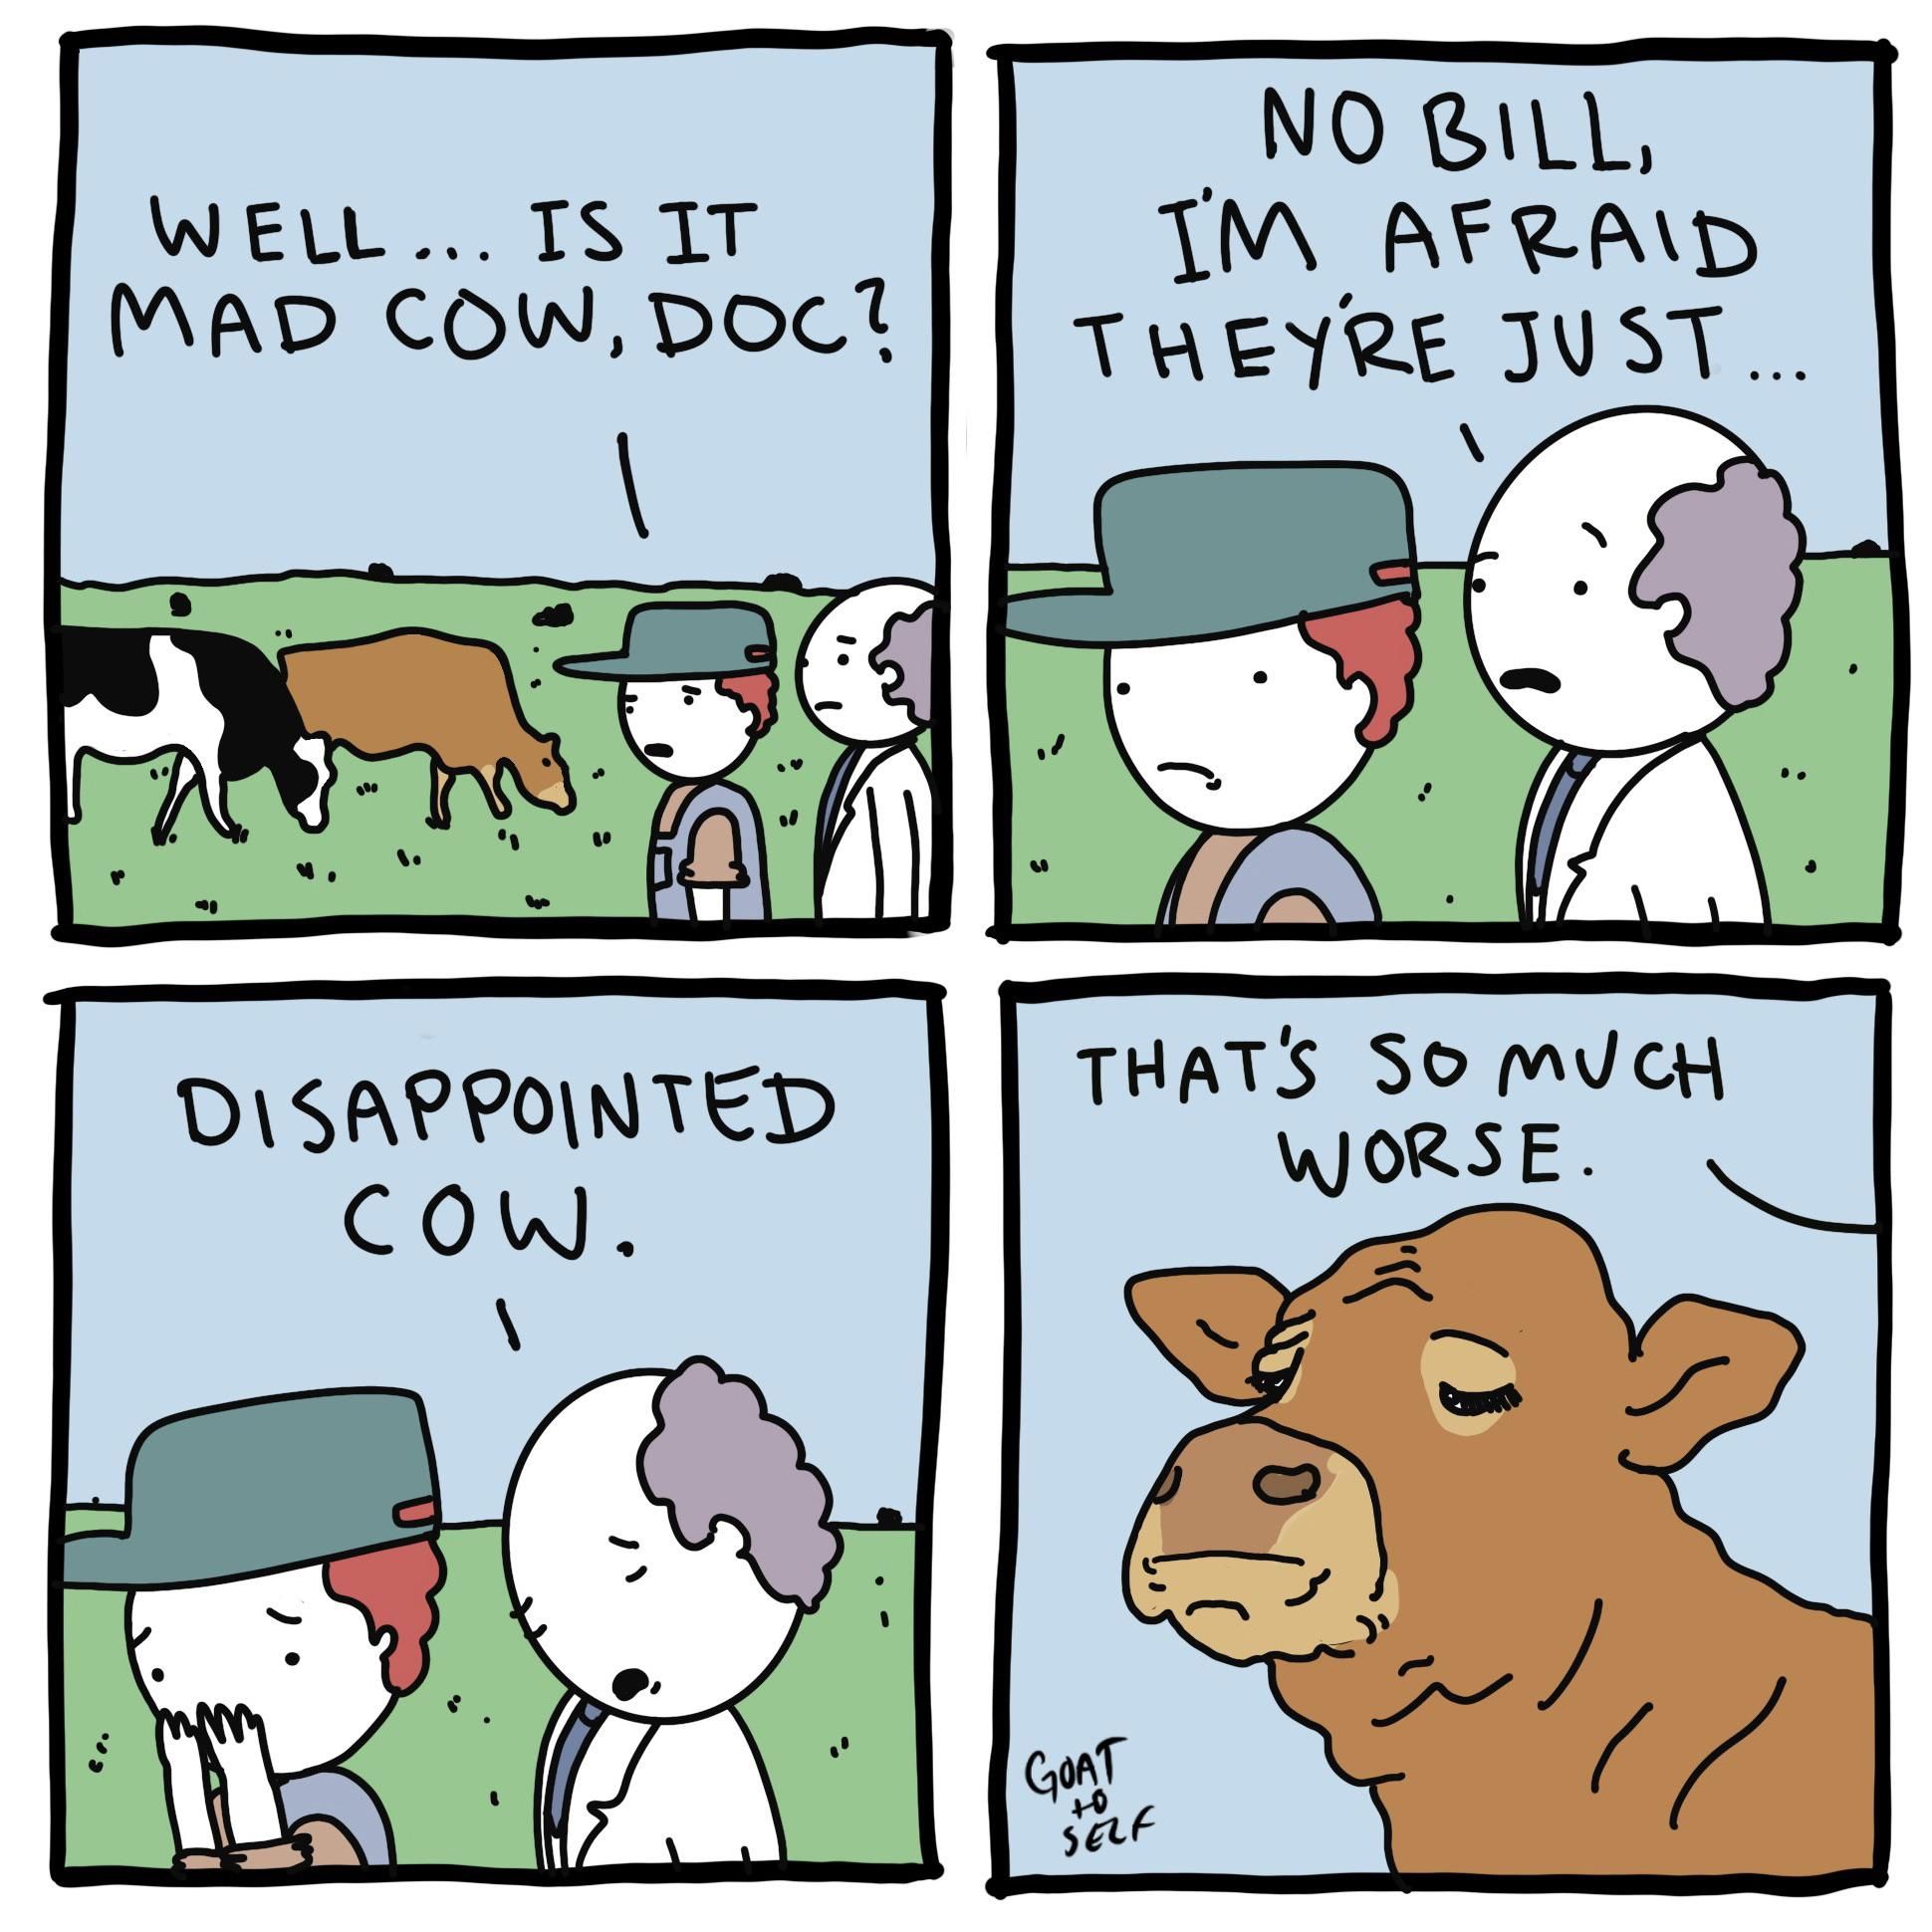 Just in a mooed